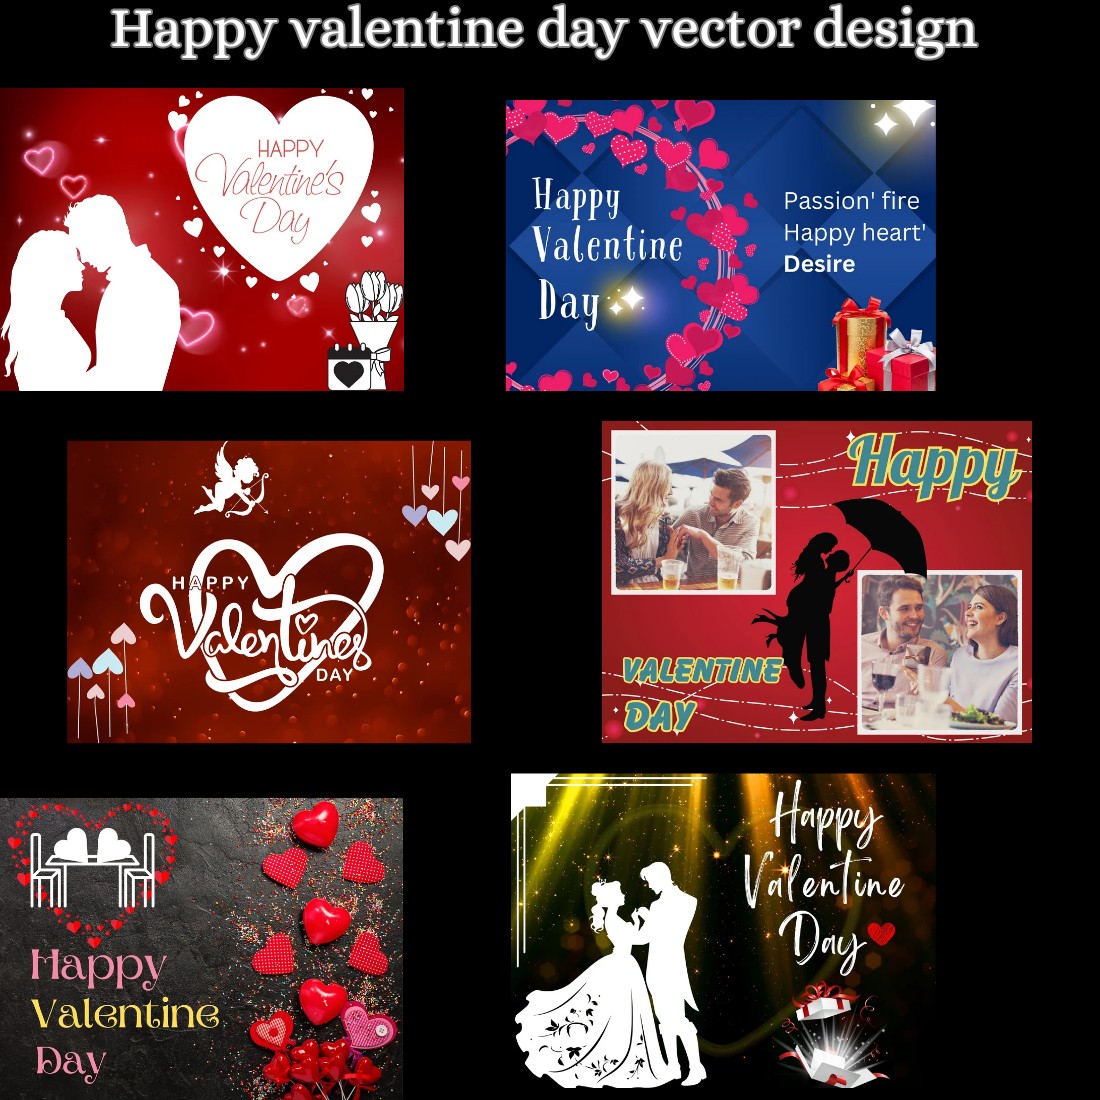 25 Happy valentine day vector image in png file preview image.